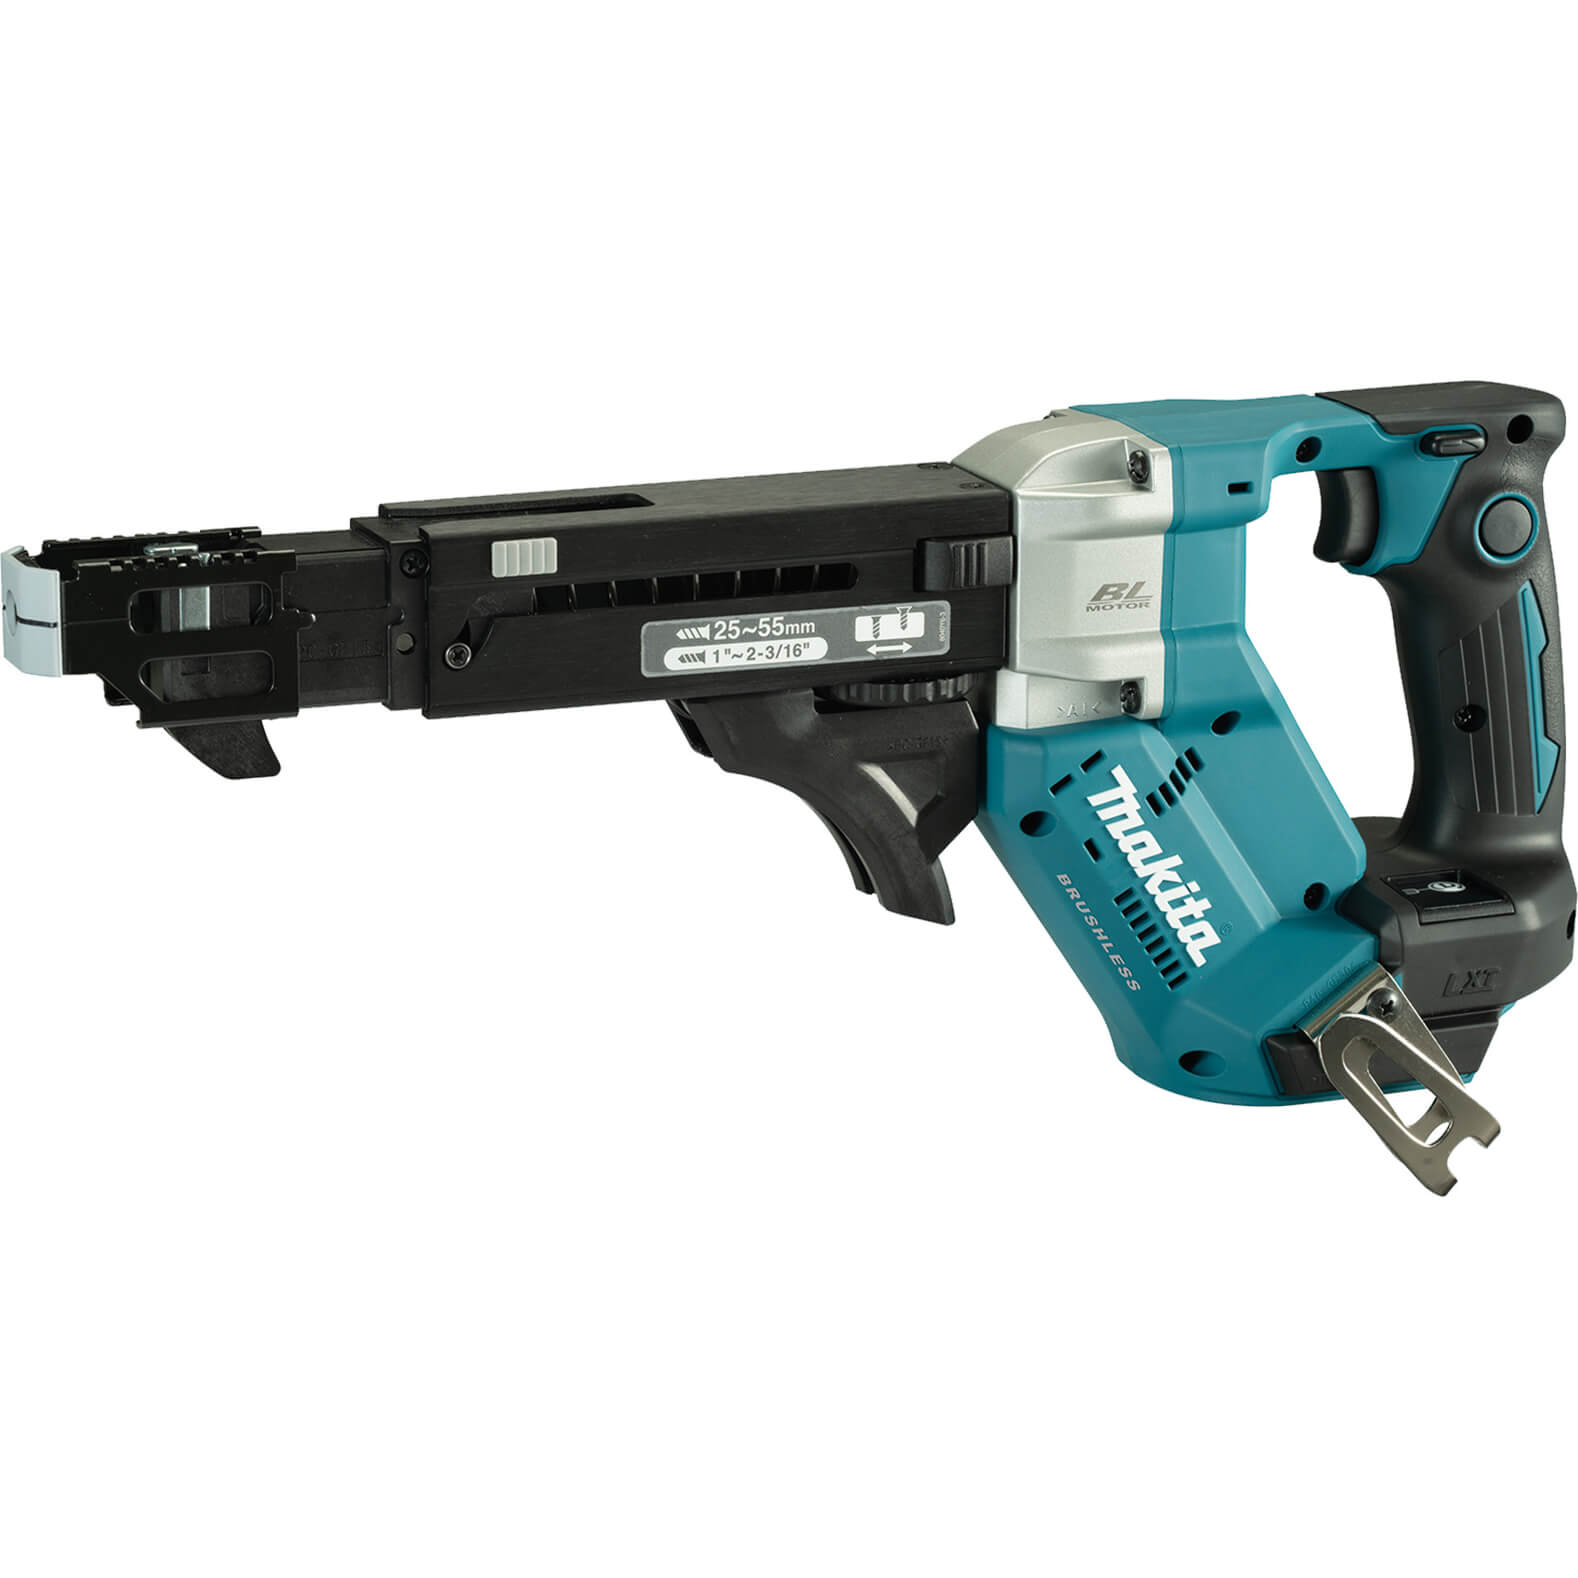 Image of Makita DFR551 18v LXT Cordless Brushless Auto Feed Screwdriver No Batteries No Charger No Case